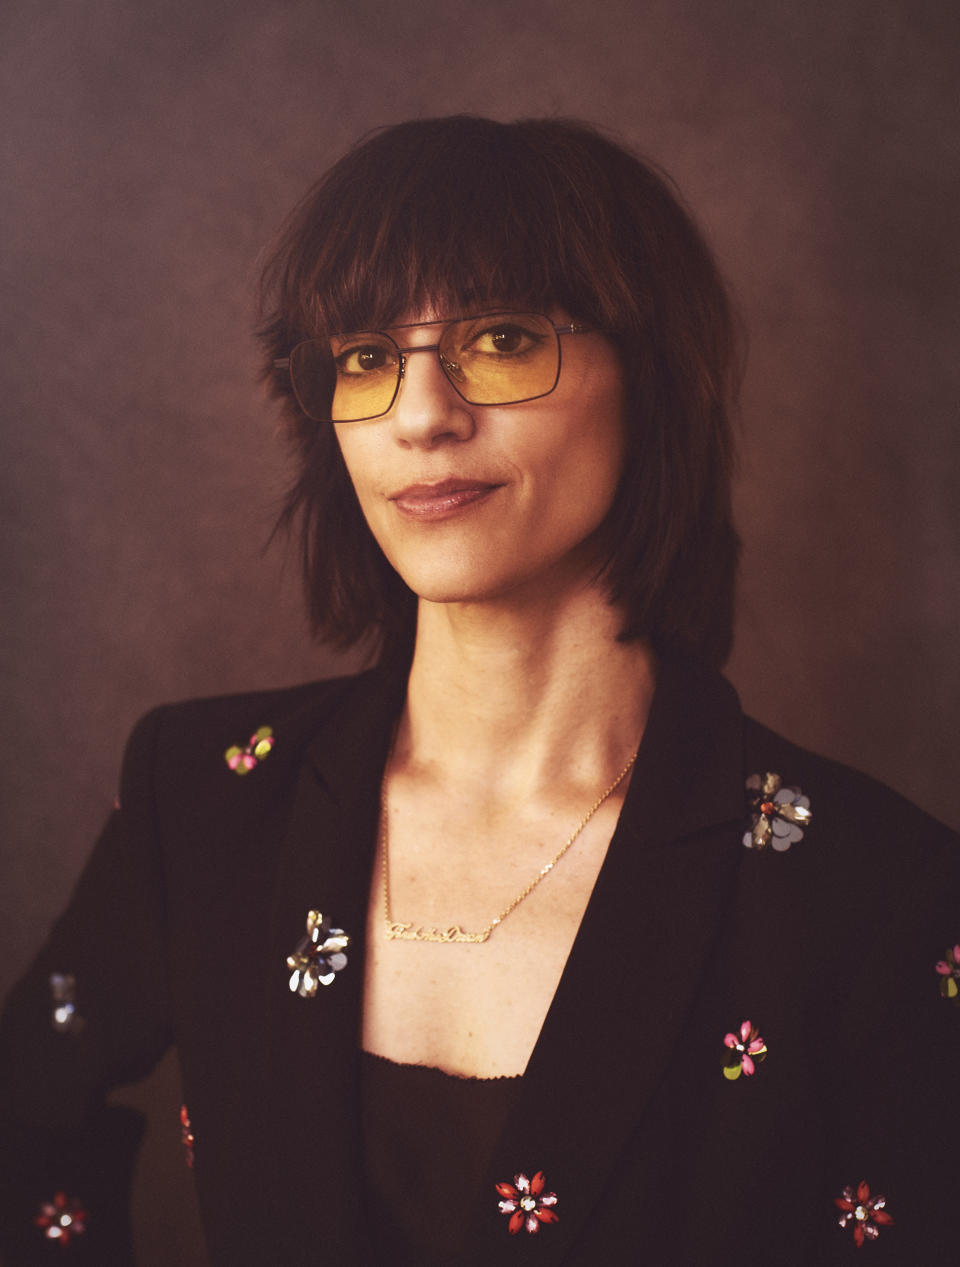 Image: Ana Lily Amirpour (Laurent Koffel / Gamma-Rapho via Getty Images)